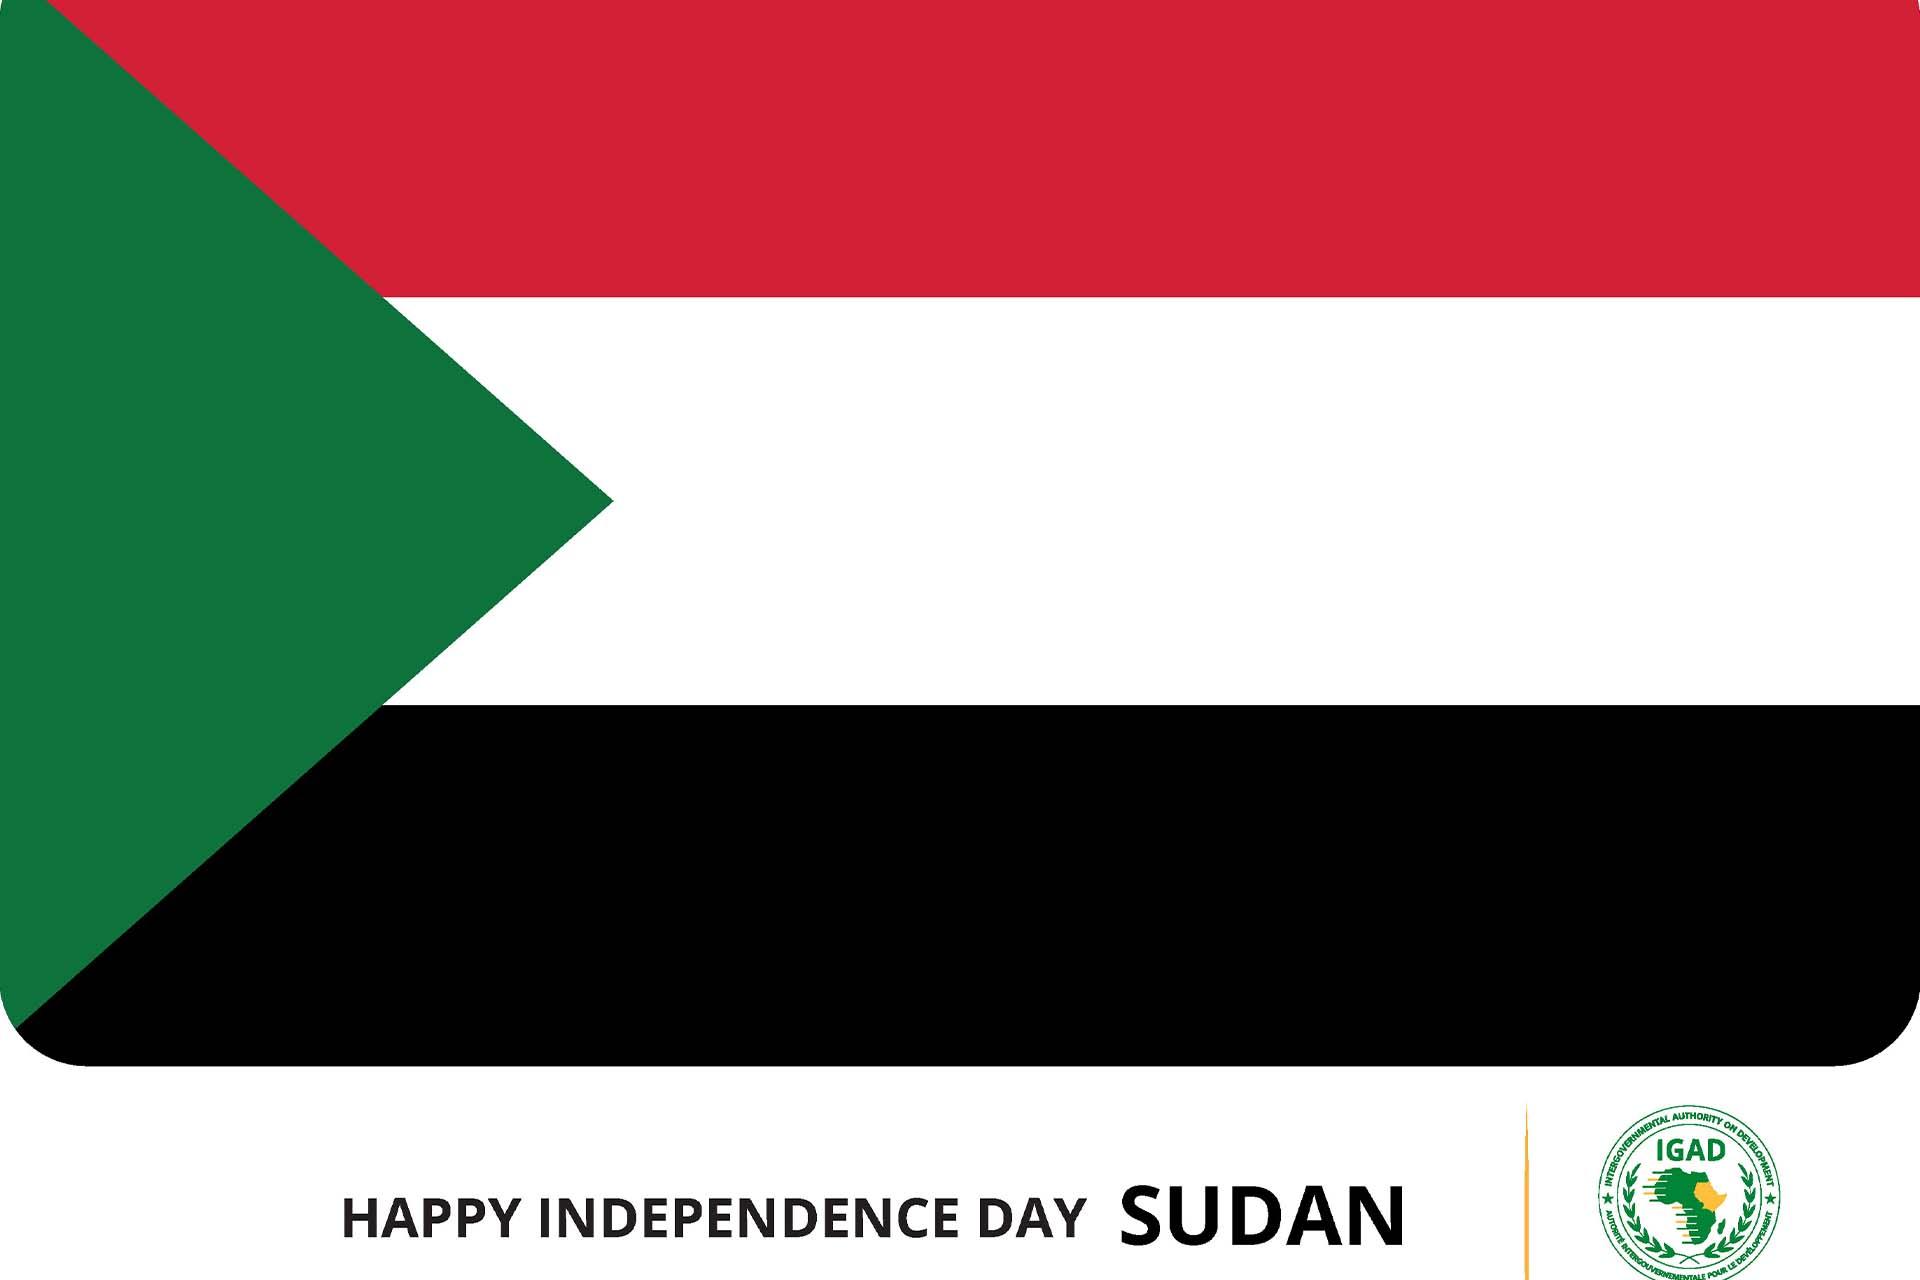 Happy Independence Day Sudan